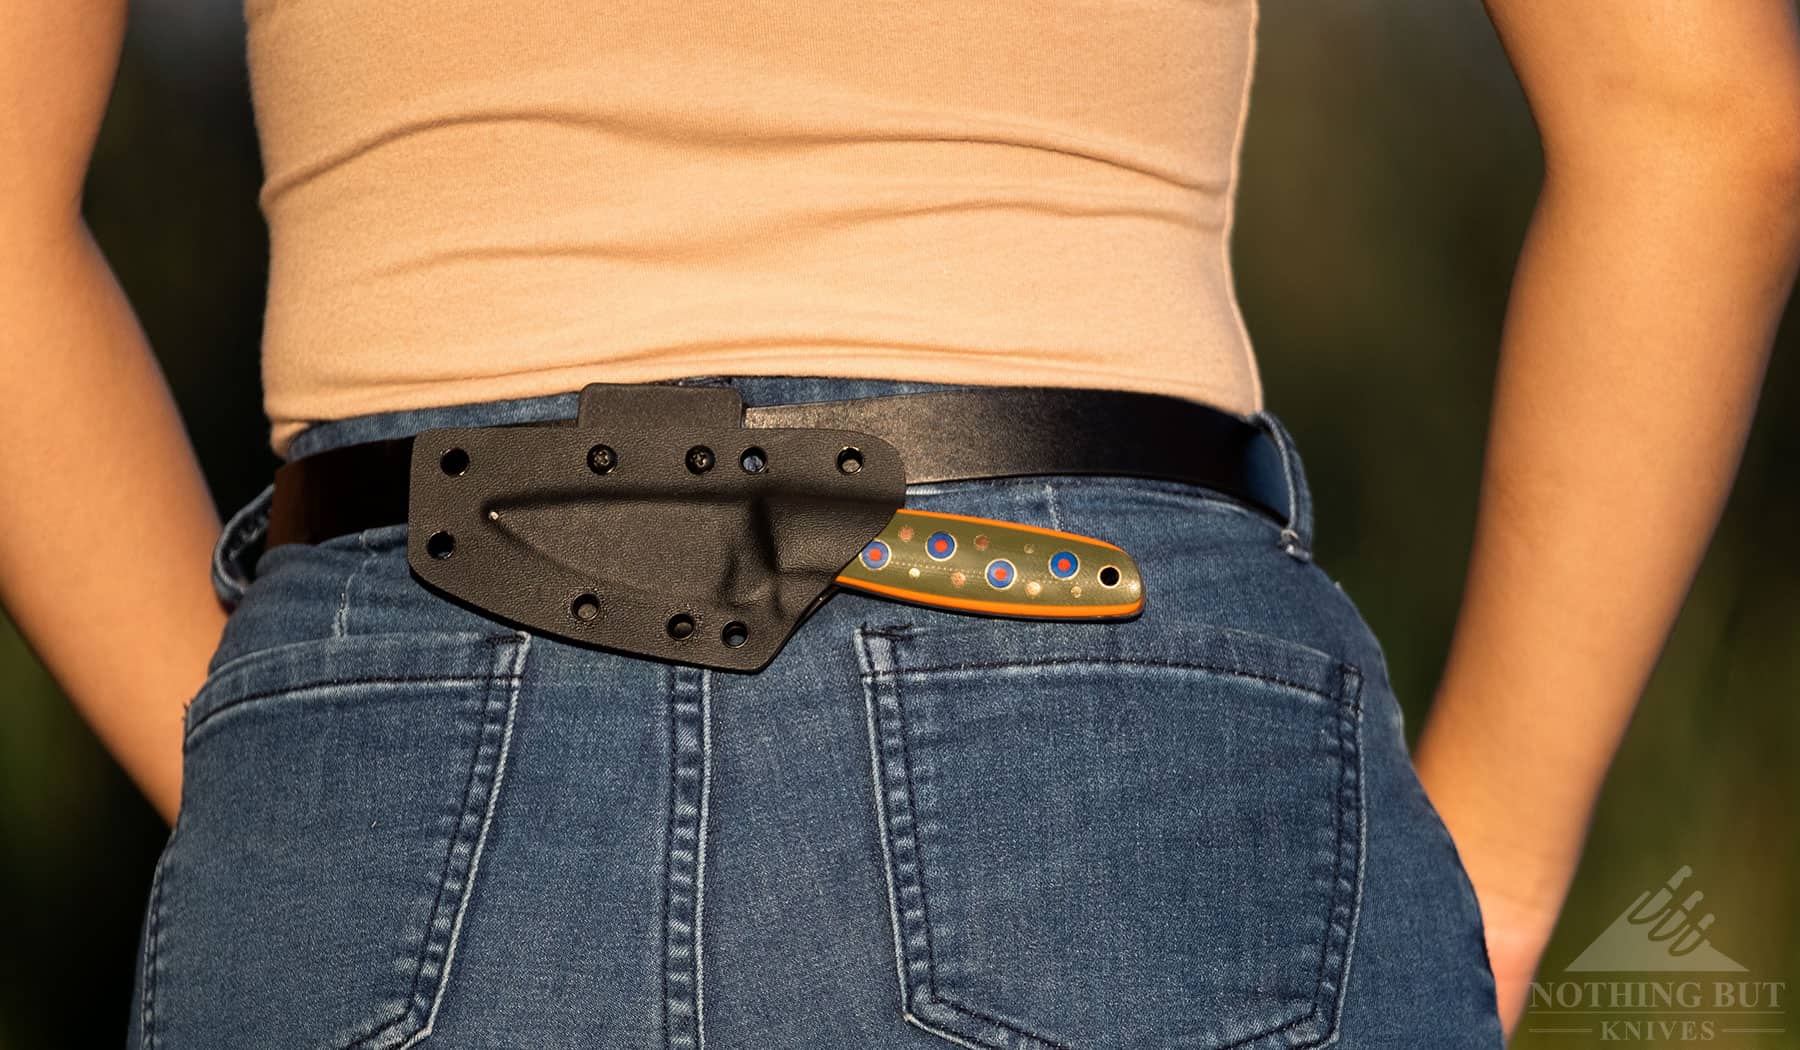 The Boker Plus makes a great backing knife, because it is lightweight, and the sheath can be configured for vertical or horizontal carry on a belt or backpack.